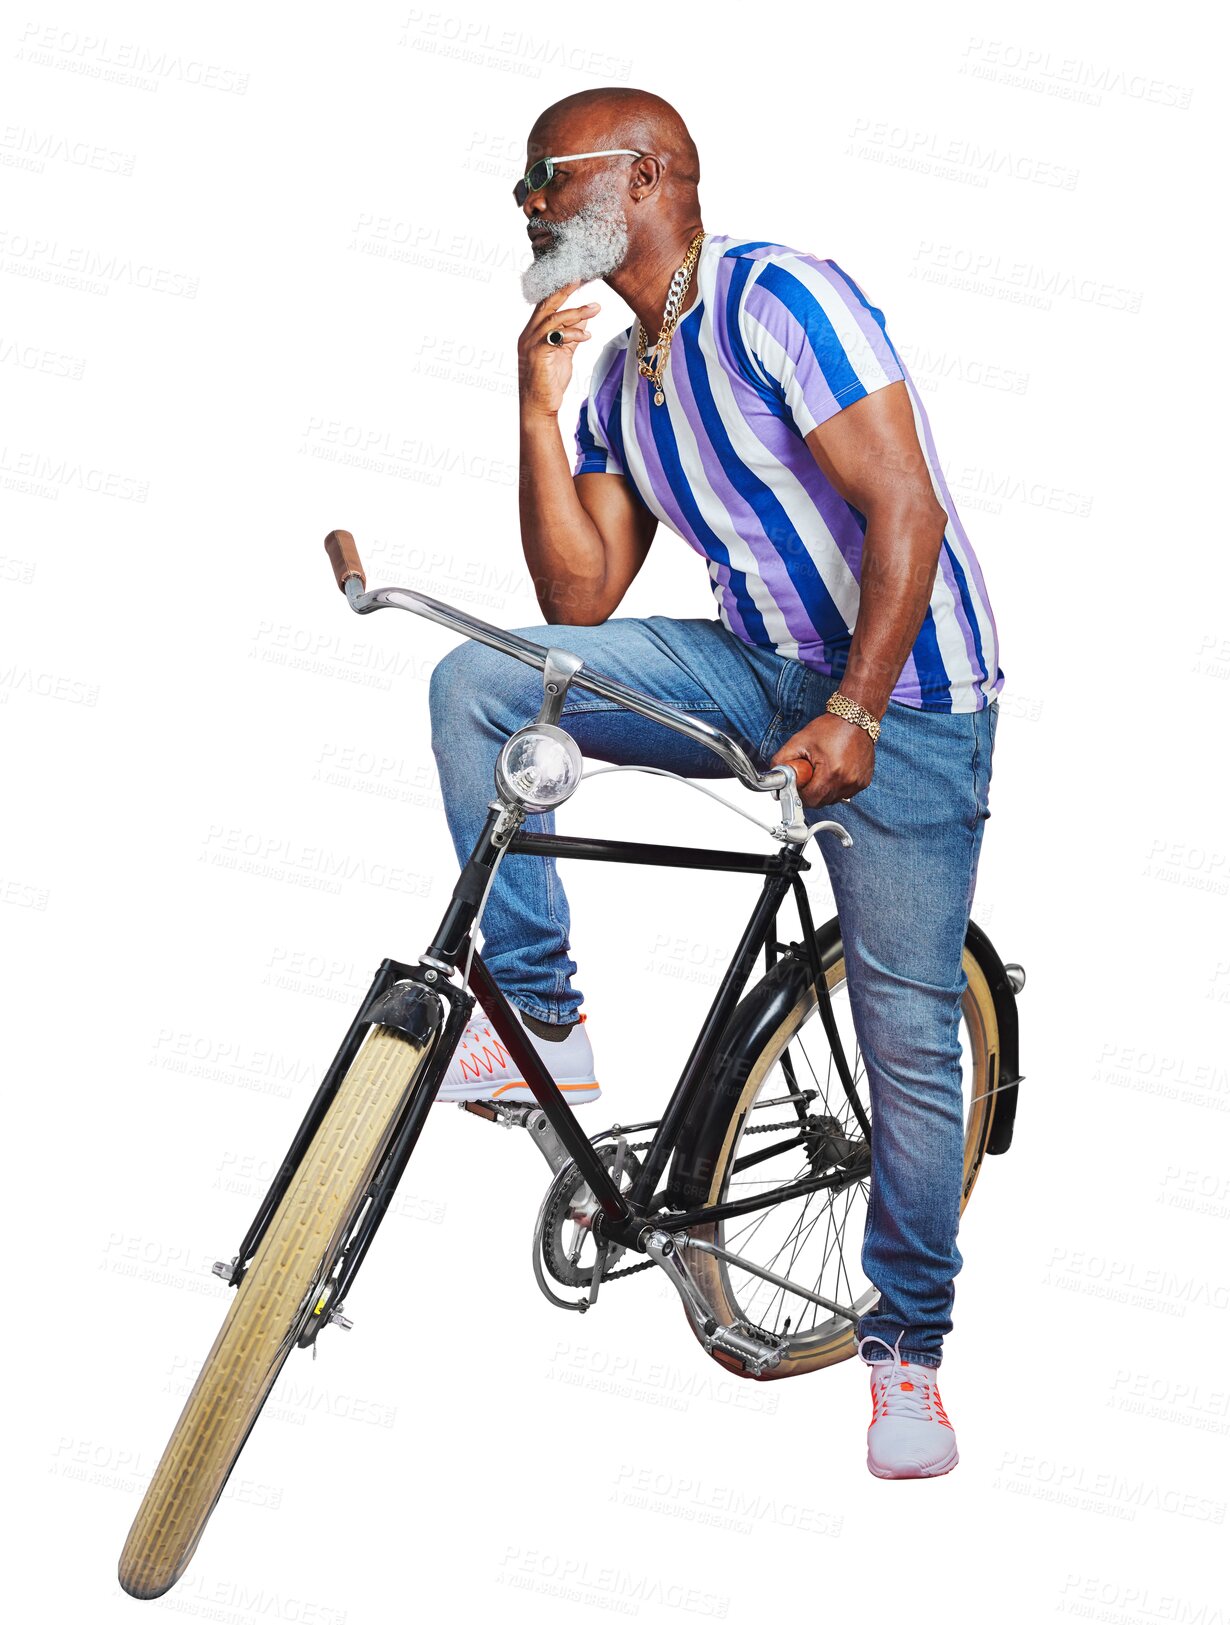 Buy stock photo Senior person, bicycle or retro fashion in cool outfit isolated on png transparent background. Sunglasses, thinking or mature black man in creative streetwear jeans on vintage bike with confidence 